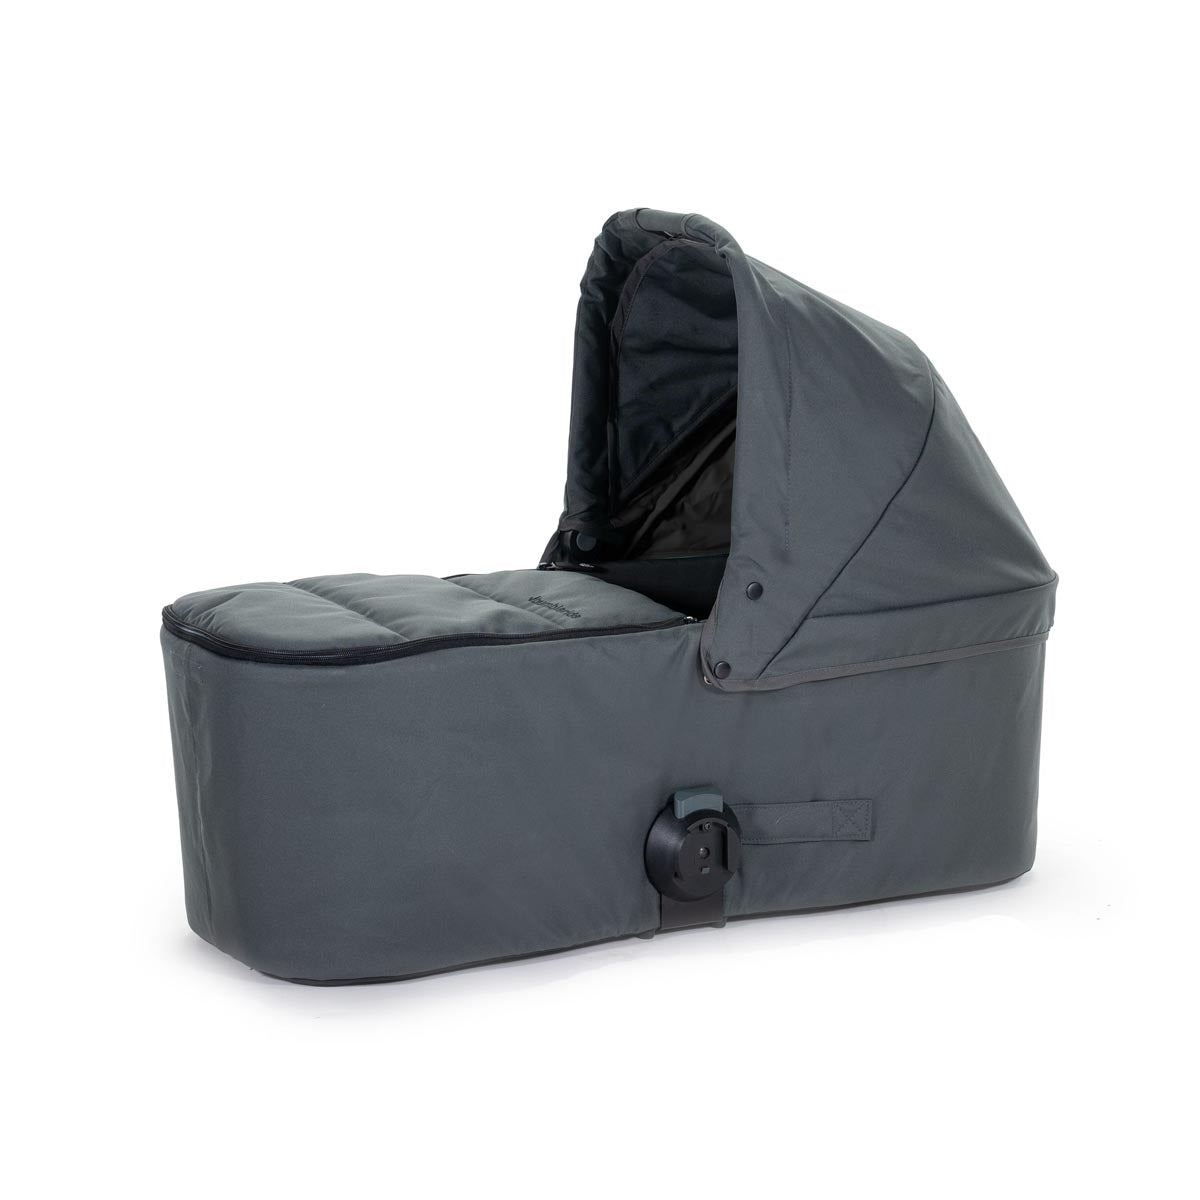 Bumbleride Single Bassinet for the Era, Indie and Speed